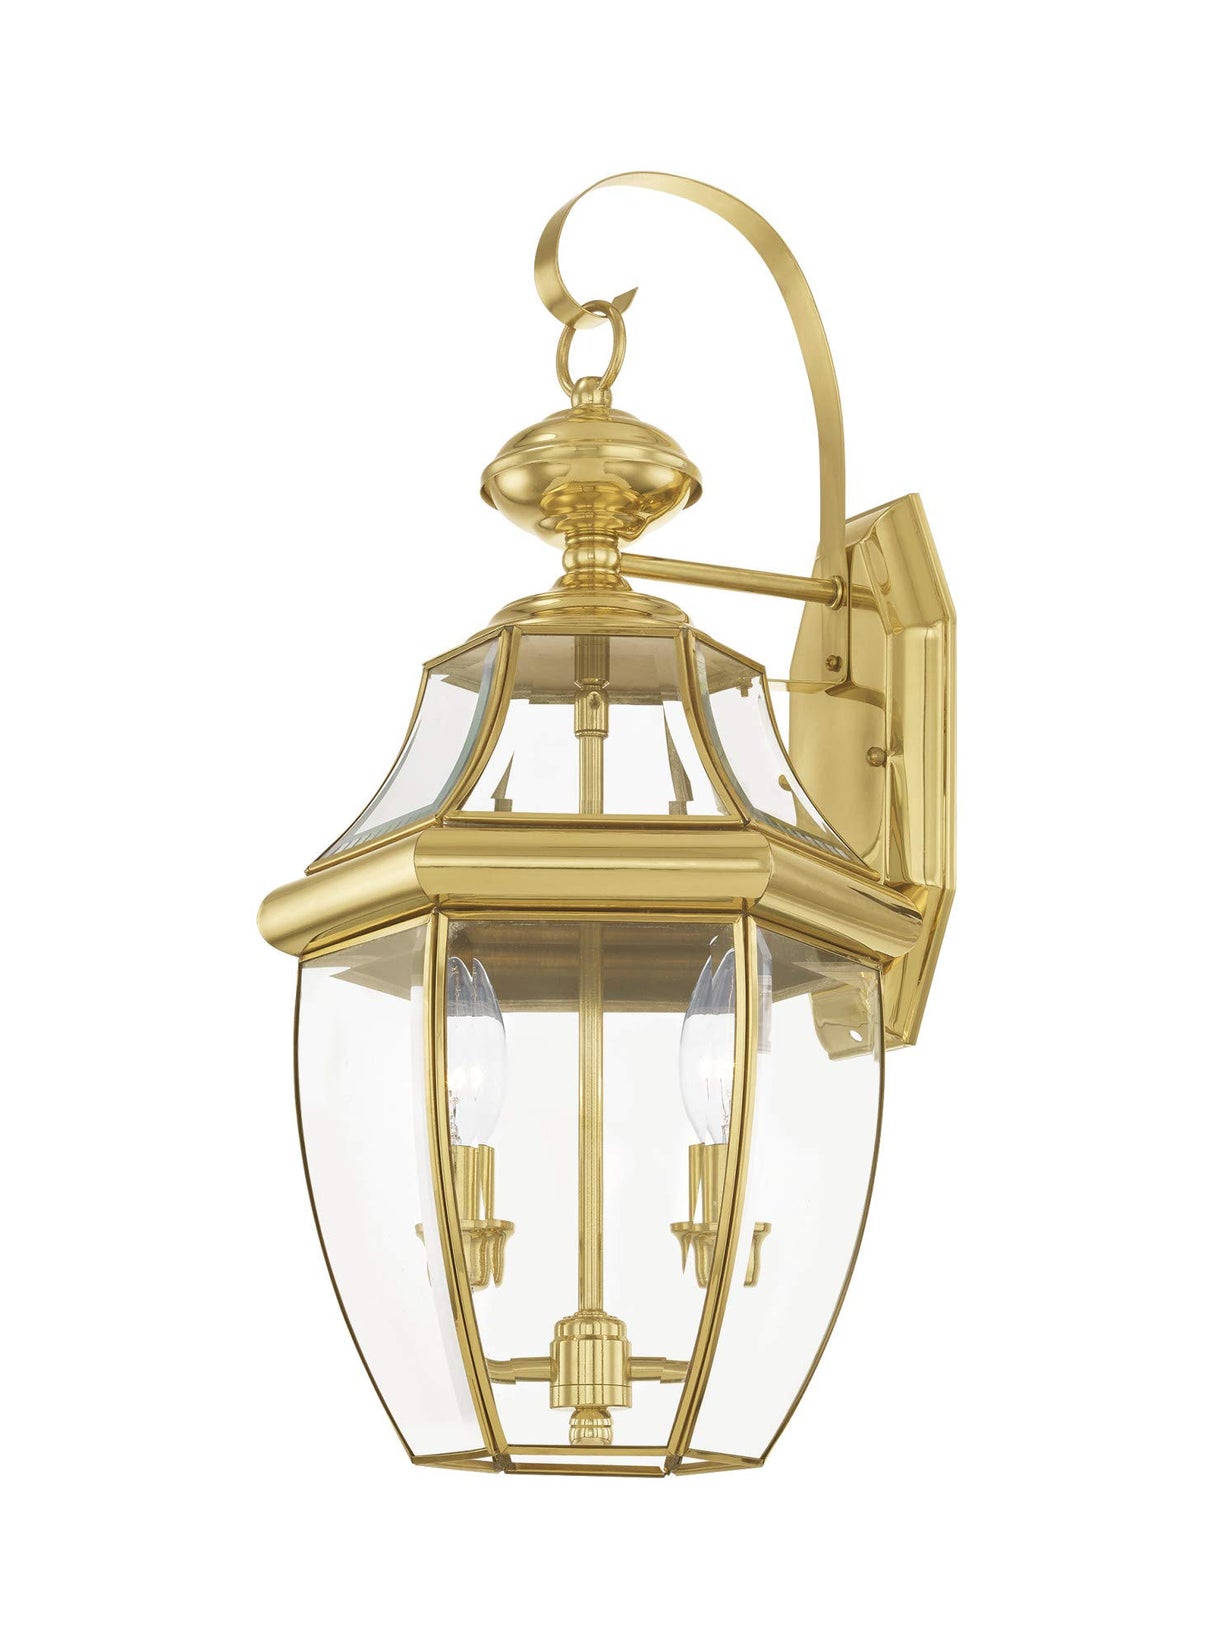 Livex Lighting 2251-91 Monterey 2 Light Outdoor Brushed Nickel Finish Solid Brass Wall Lantern with Clear Beveled Glass